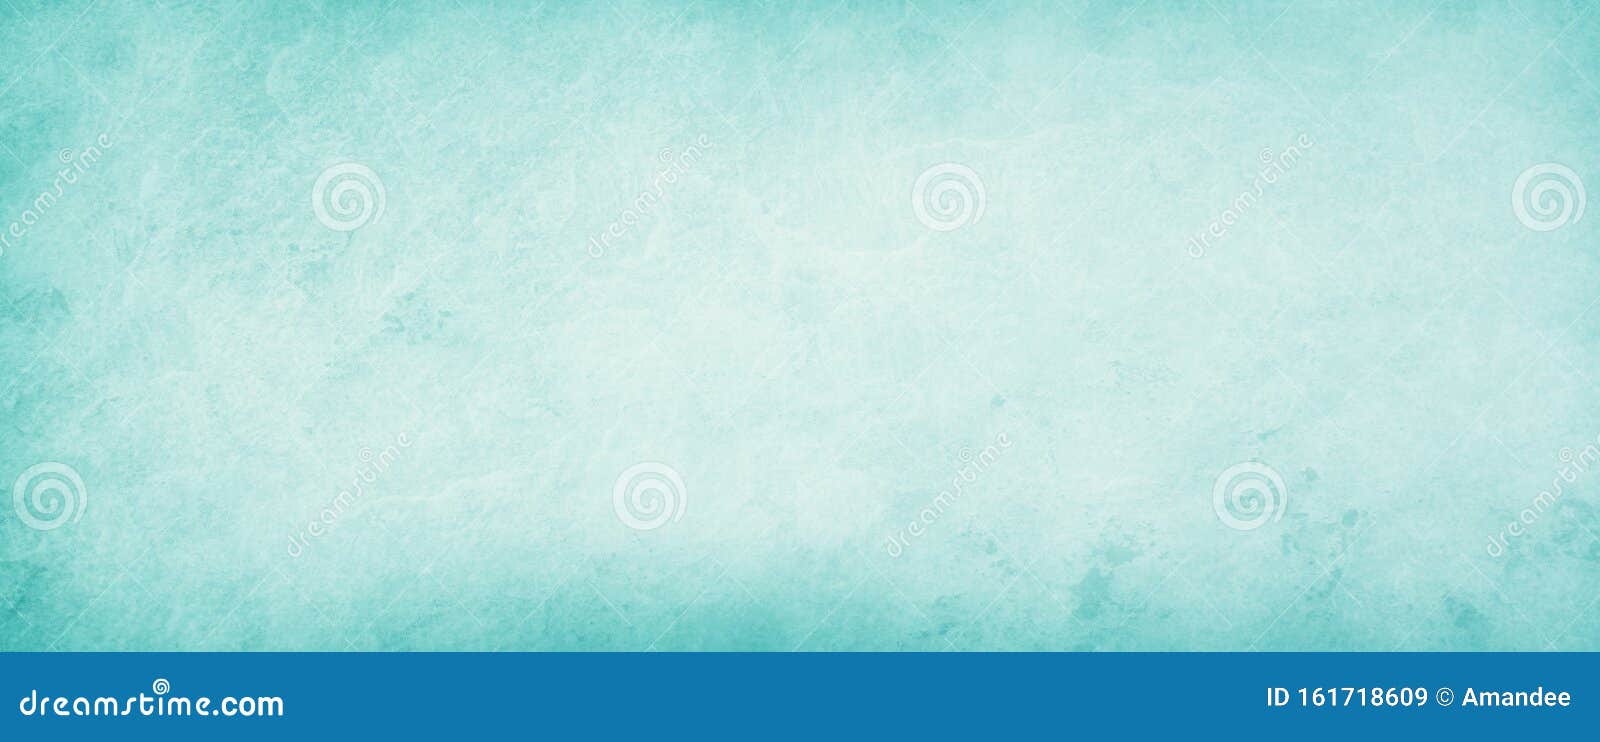 abstract pastel blue green background with soft white center and darker marbled grainy border with old vintage grunge